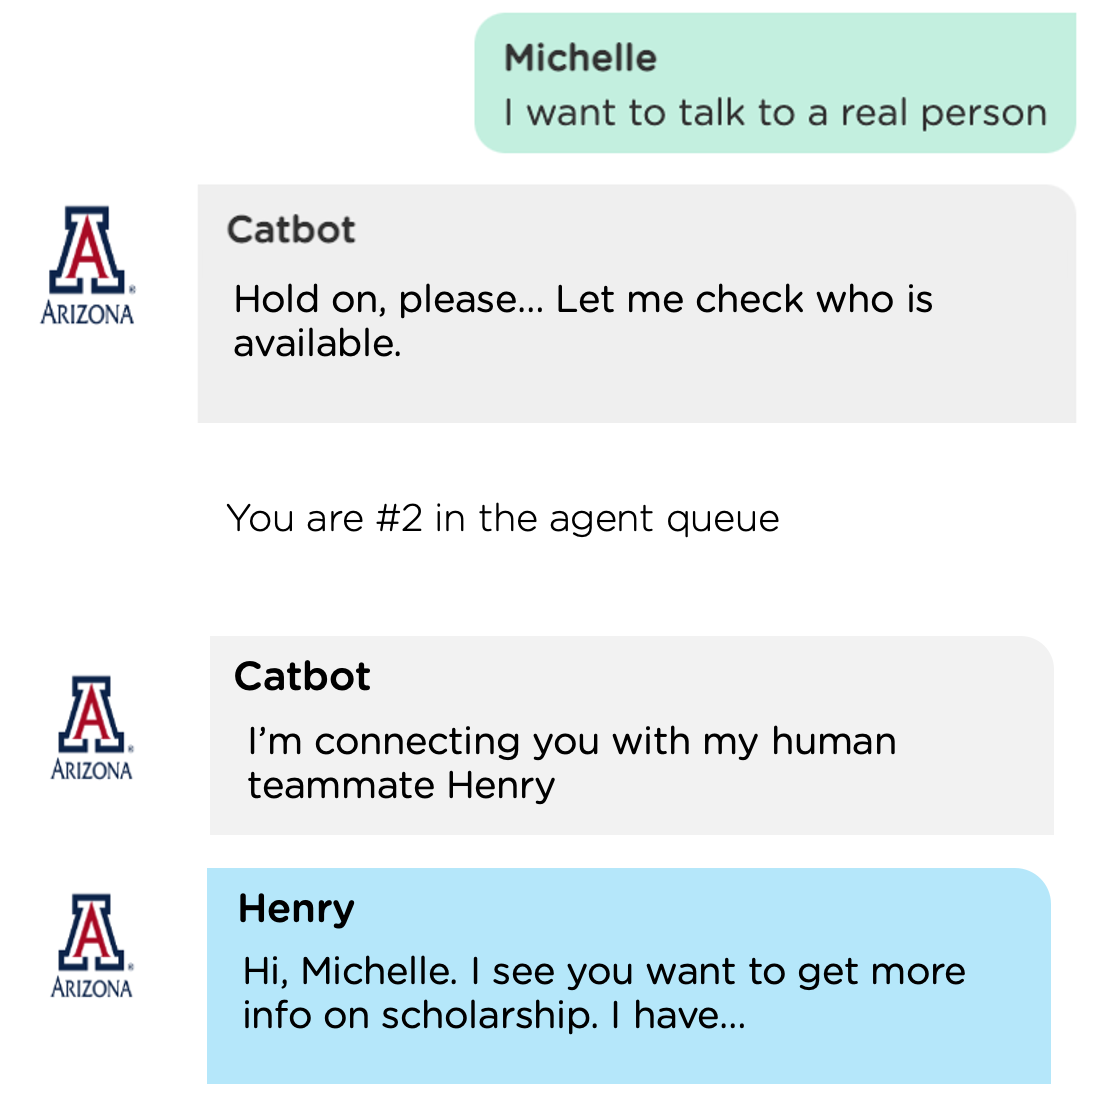 Example transition from chatbot to human agent